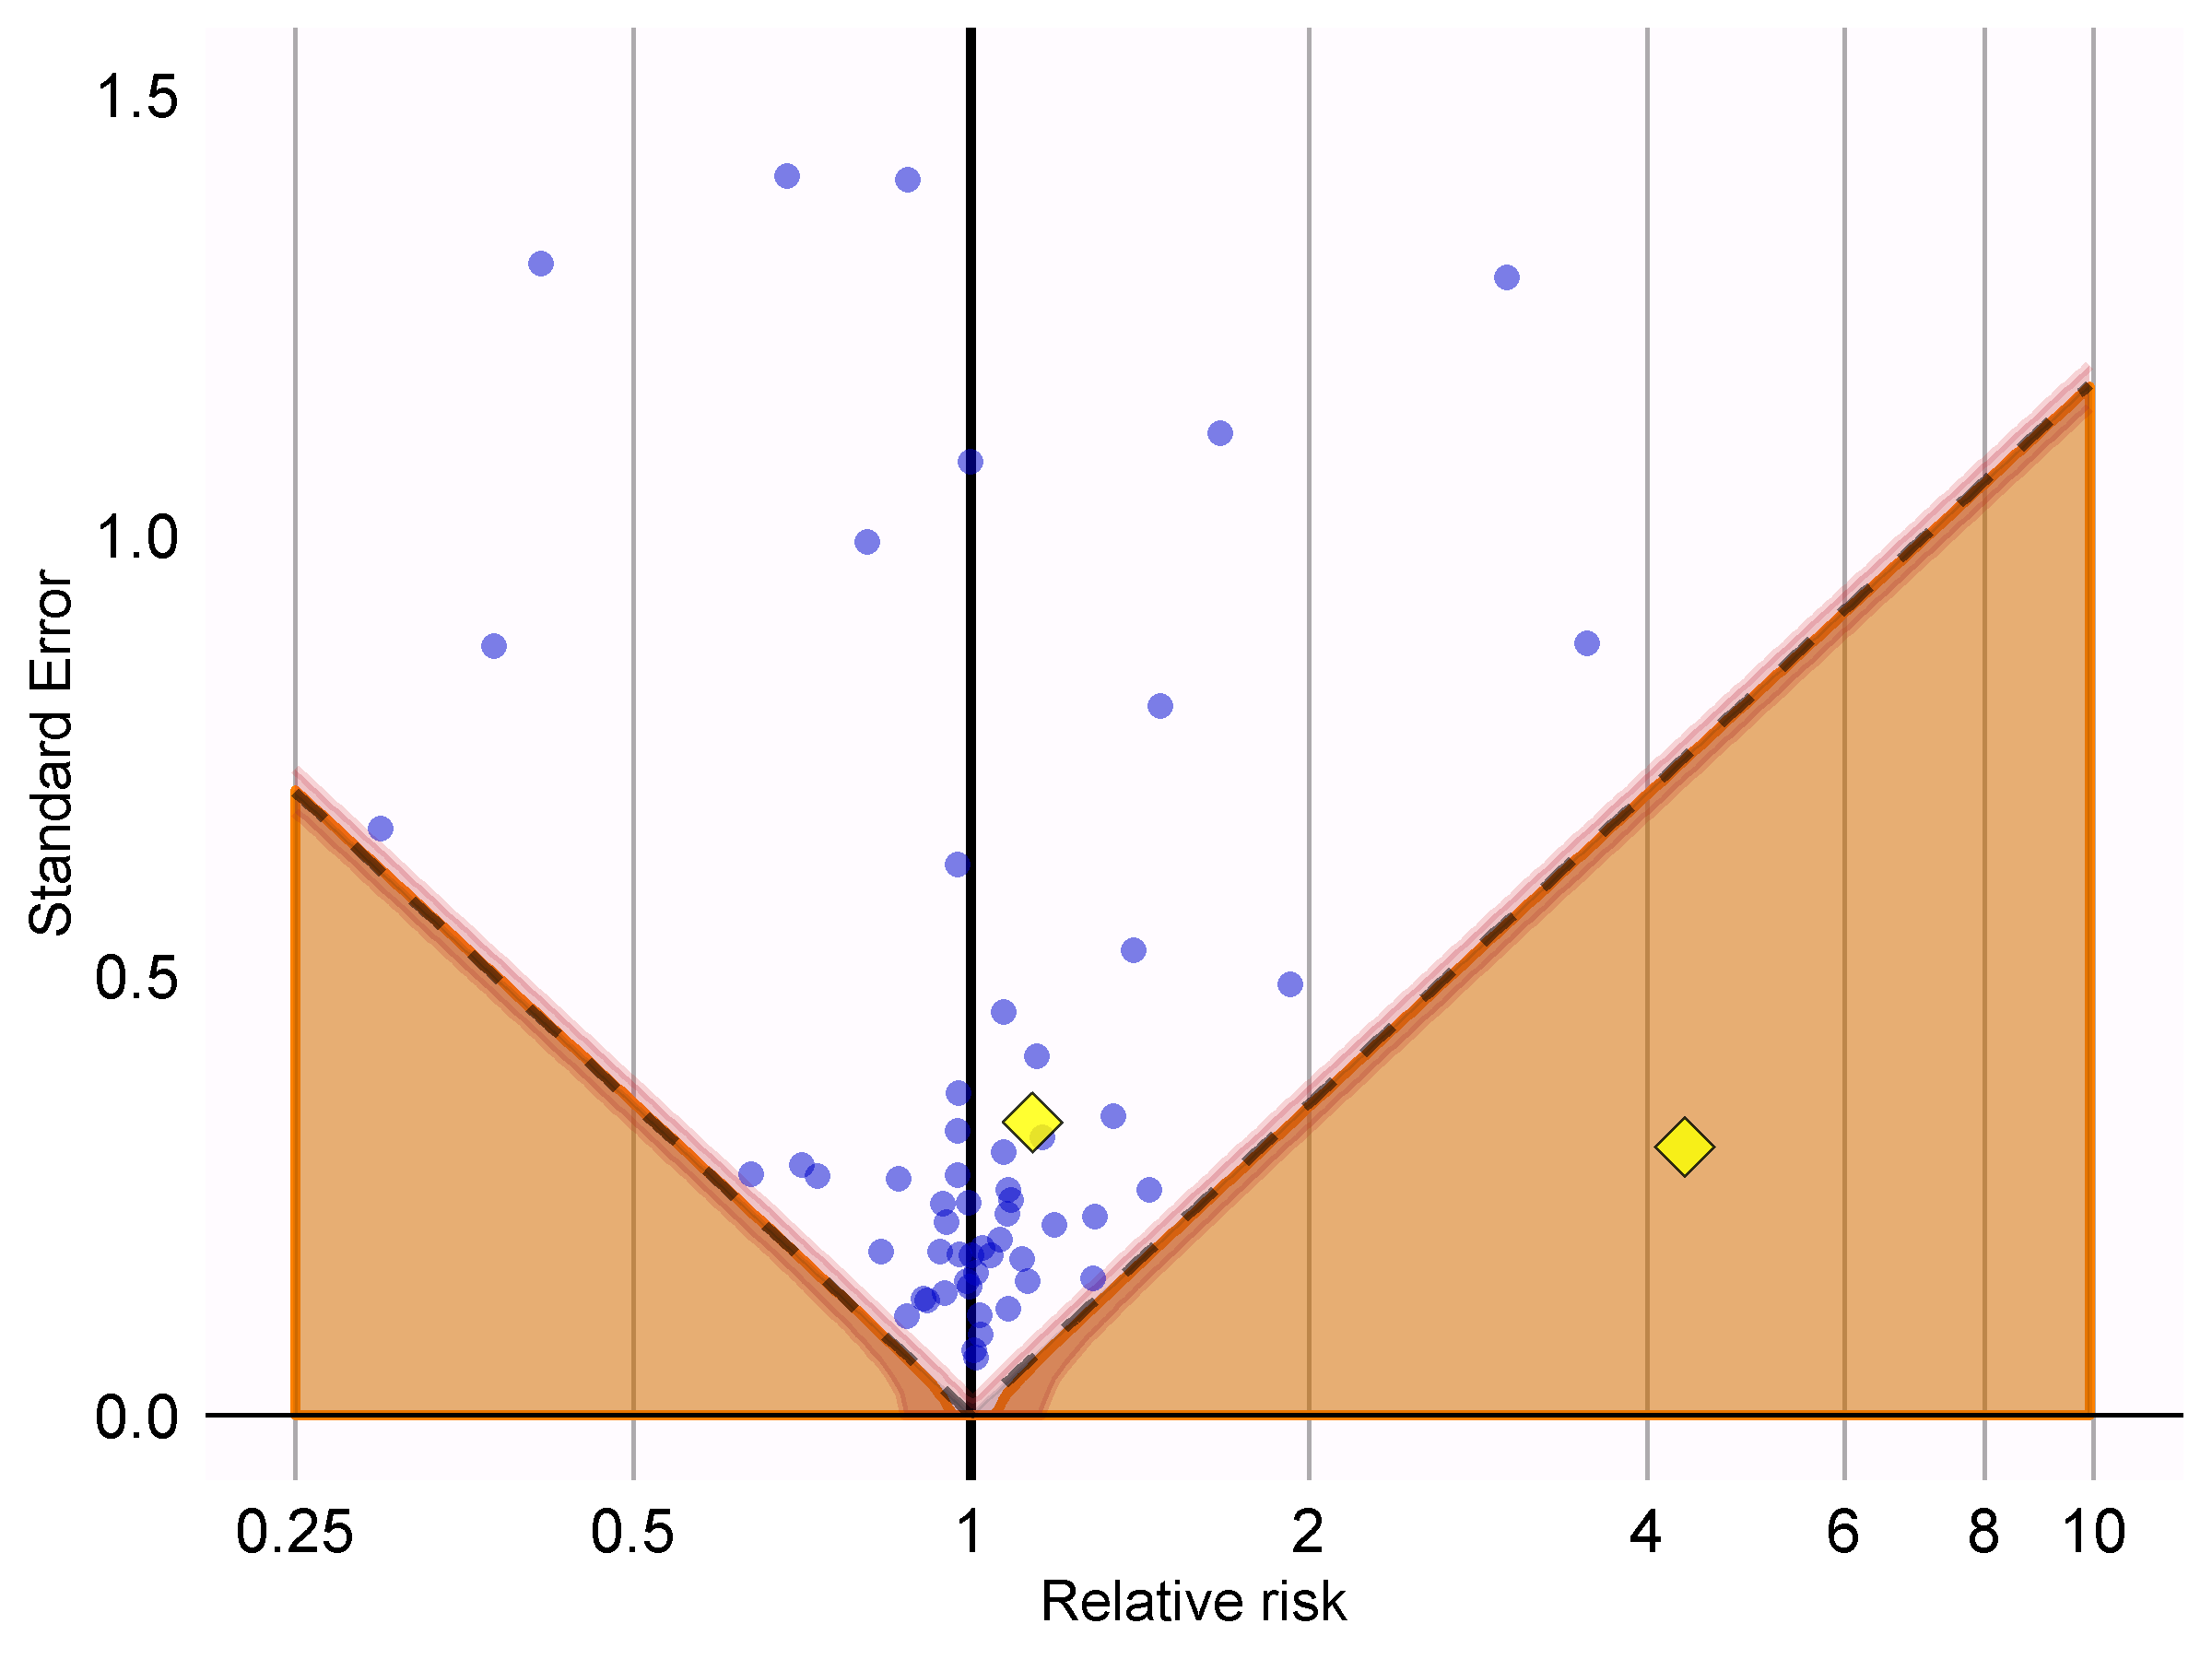 P-value calibration: estimates below the dashed line have a conventional p < 0.05. Estimates in the shaded area have calibrated p < 0.05. The narrow band around the edge of the shaded area denotes the 95\% credible interval. Dots indicate negative controls. Diamonds indicate outcomes of interest.